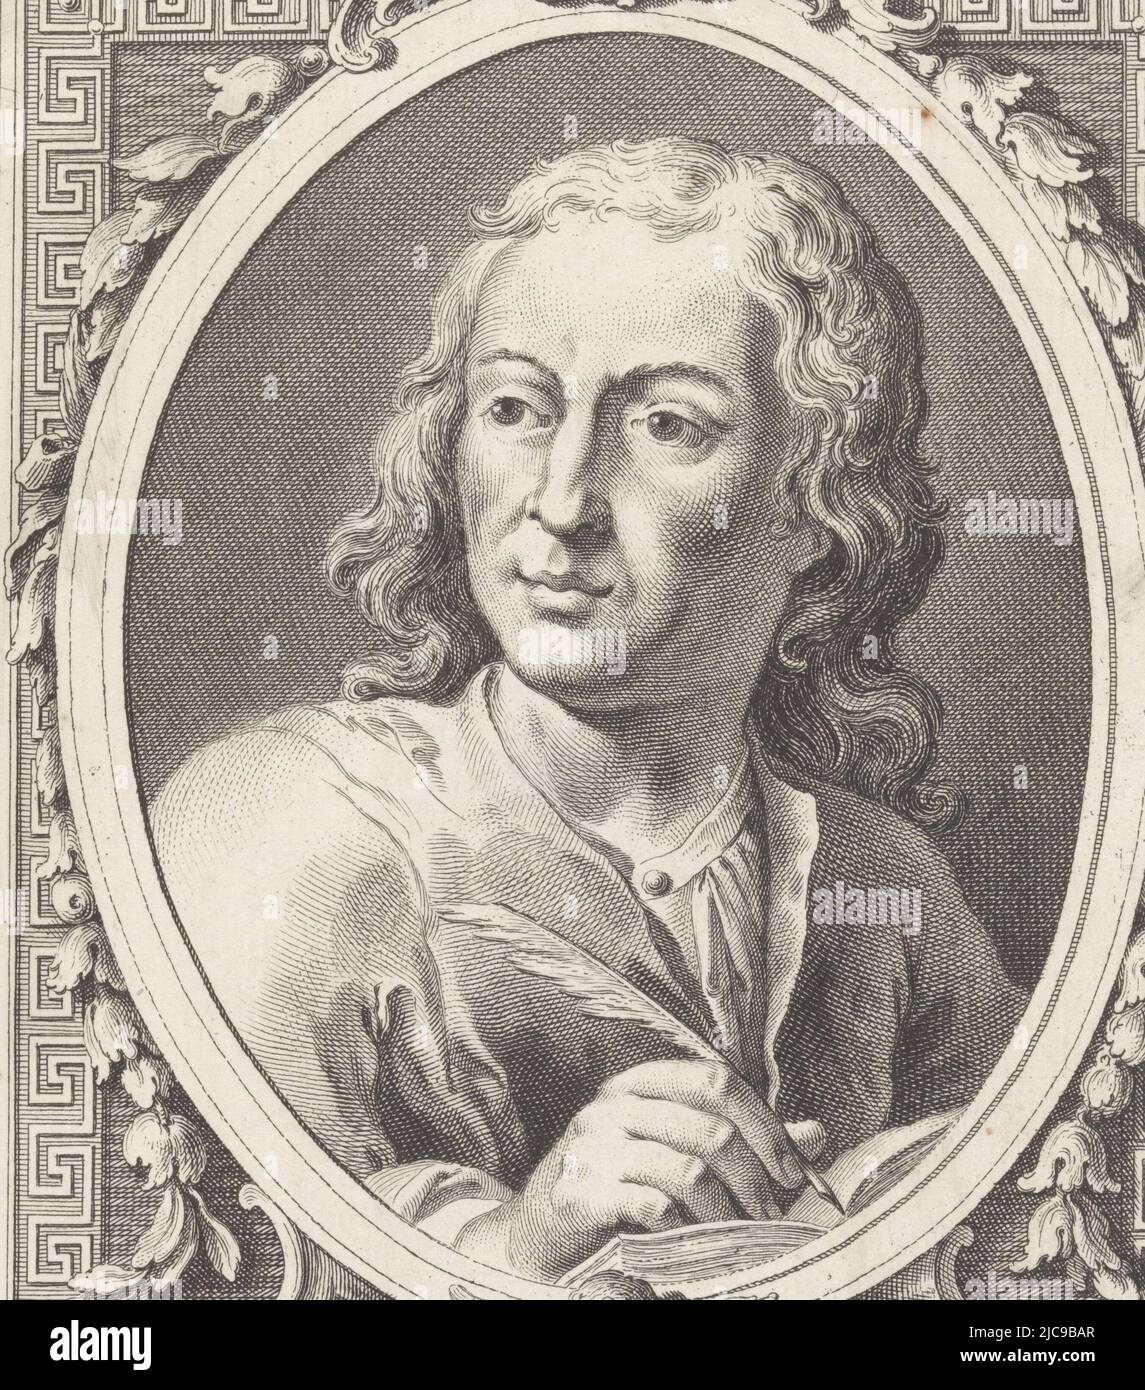 Portrait of art historian and painter Filippo Baldinucci, Portrait of Filippo Baldinucci, print maker: Antonio Baratta, (mentioned on object), Italy, 1734 - 1787, paper, engraving, h 196 mm × w 141 mm Stock Photo